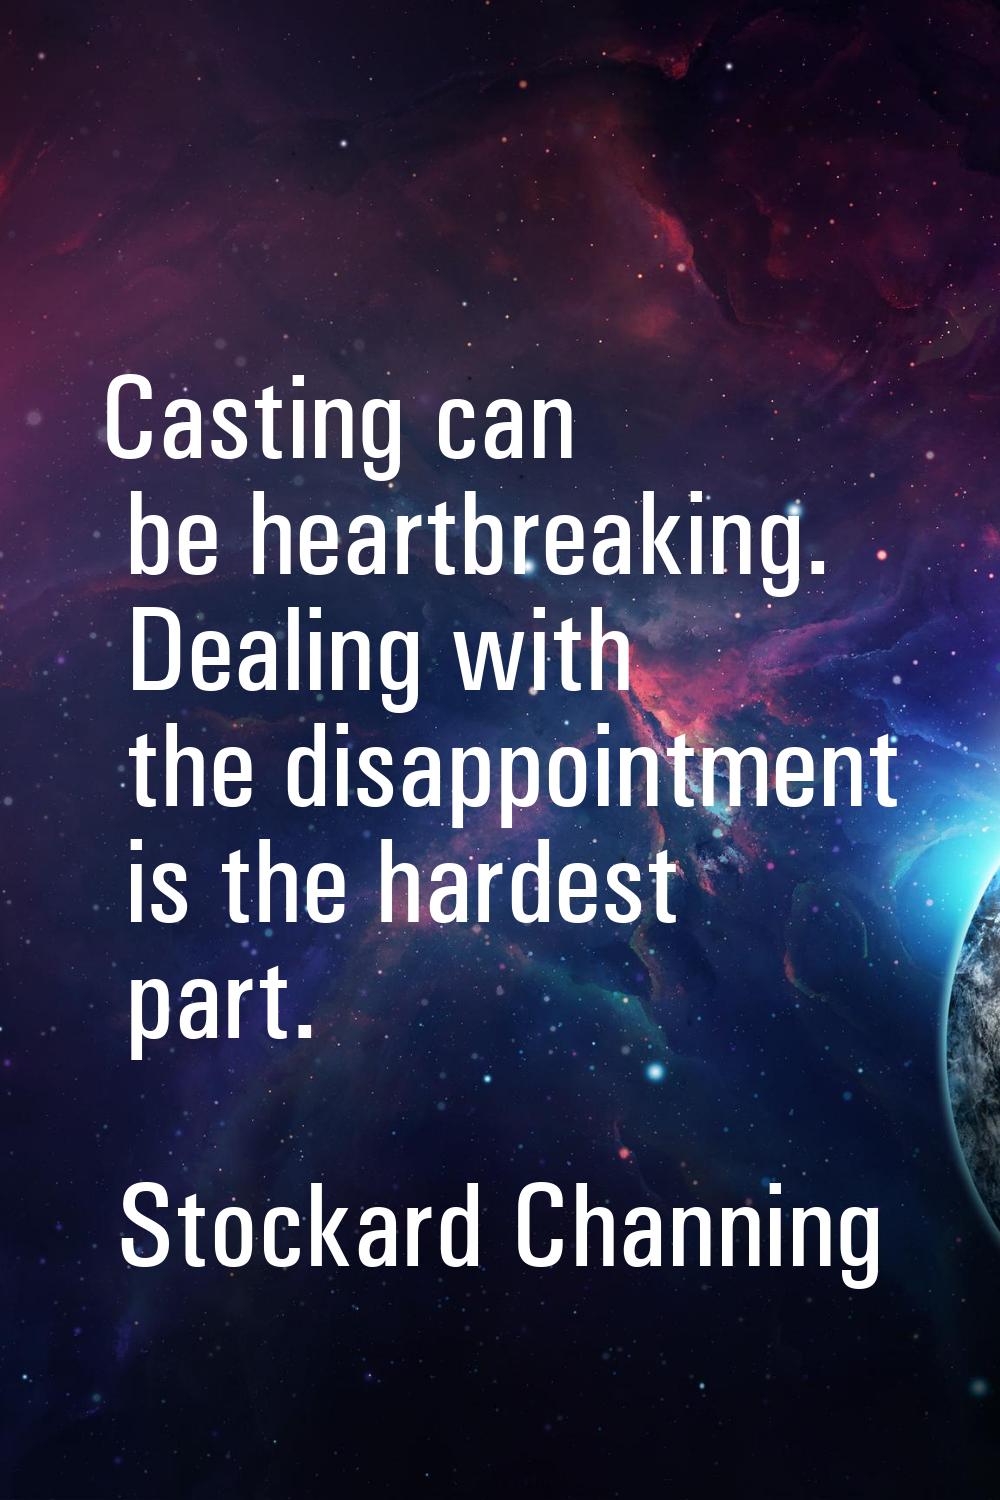 Casting can be heartbreaking. Dealing with the disappointment is the hardest part.